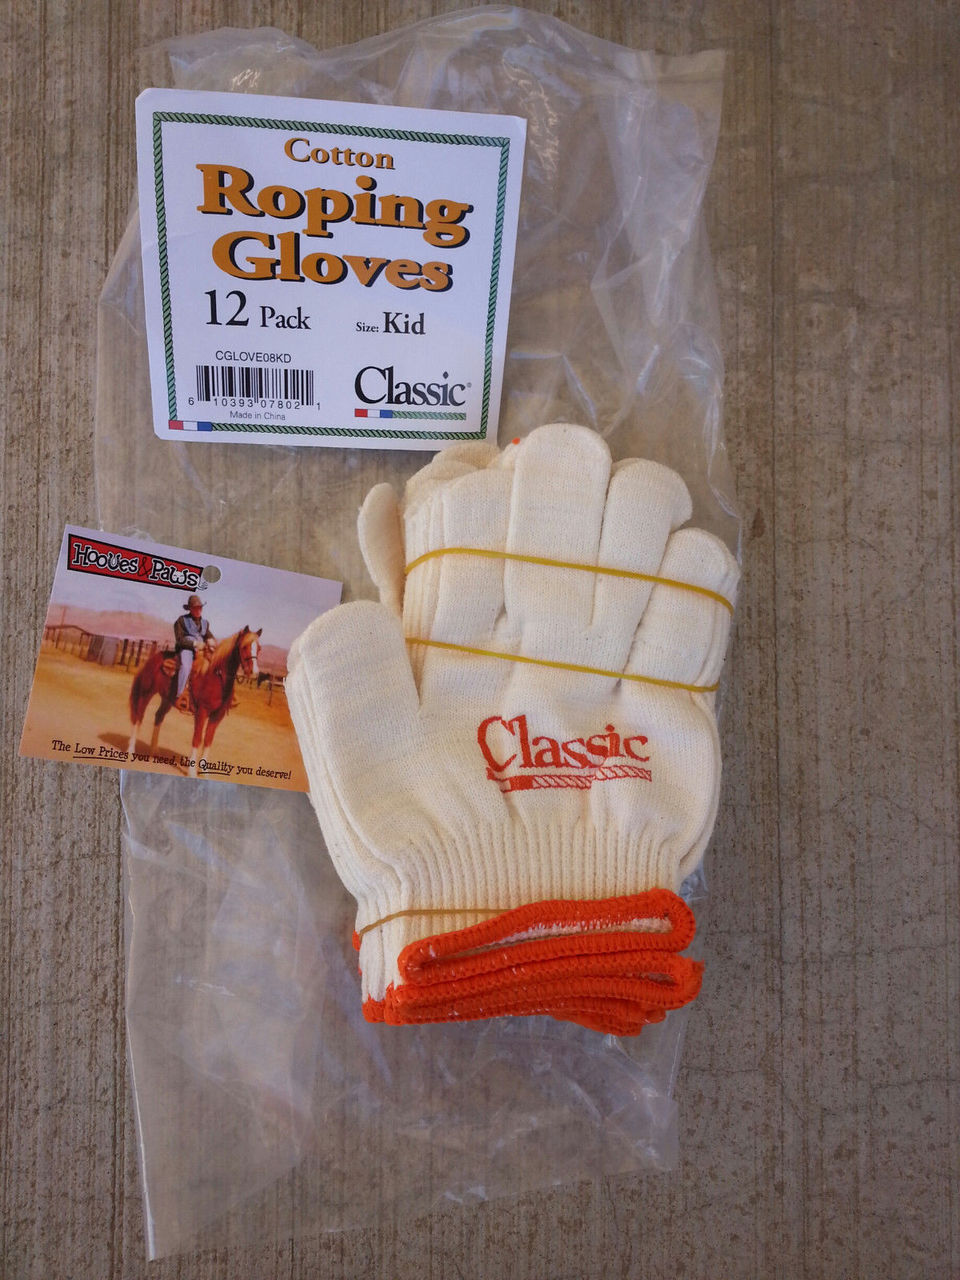 Classic Equine Classic Roping Glove 08 12 Pack